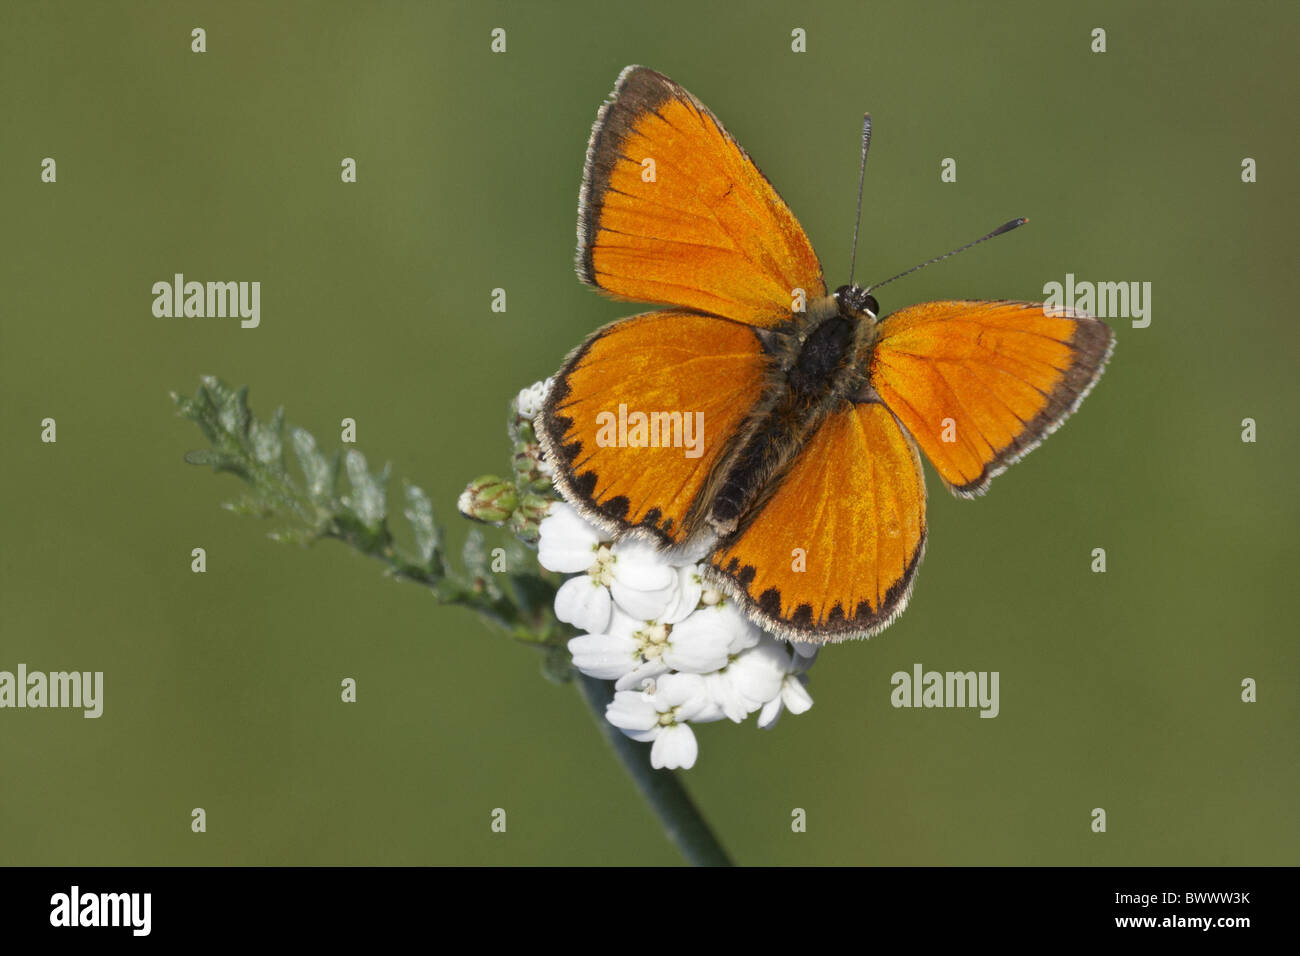 animal animals butterfly butterflies insect insects invertebrate invertebrates arthropod arthropods copper coppers europe Stock Photo